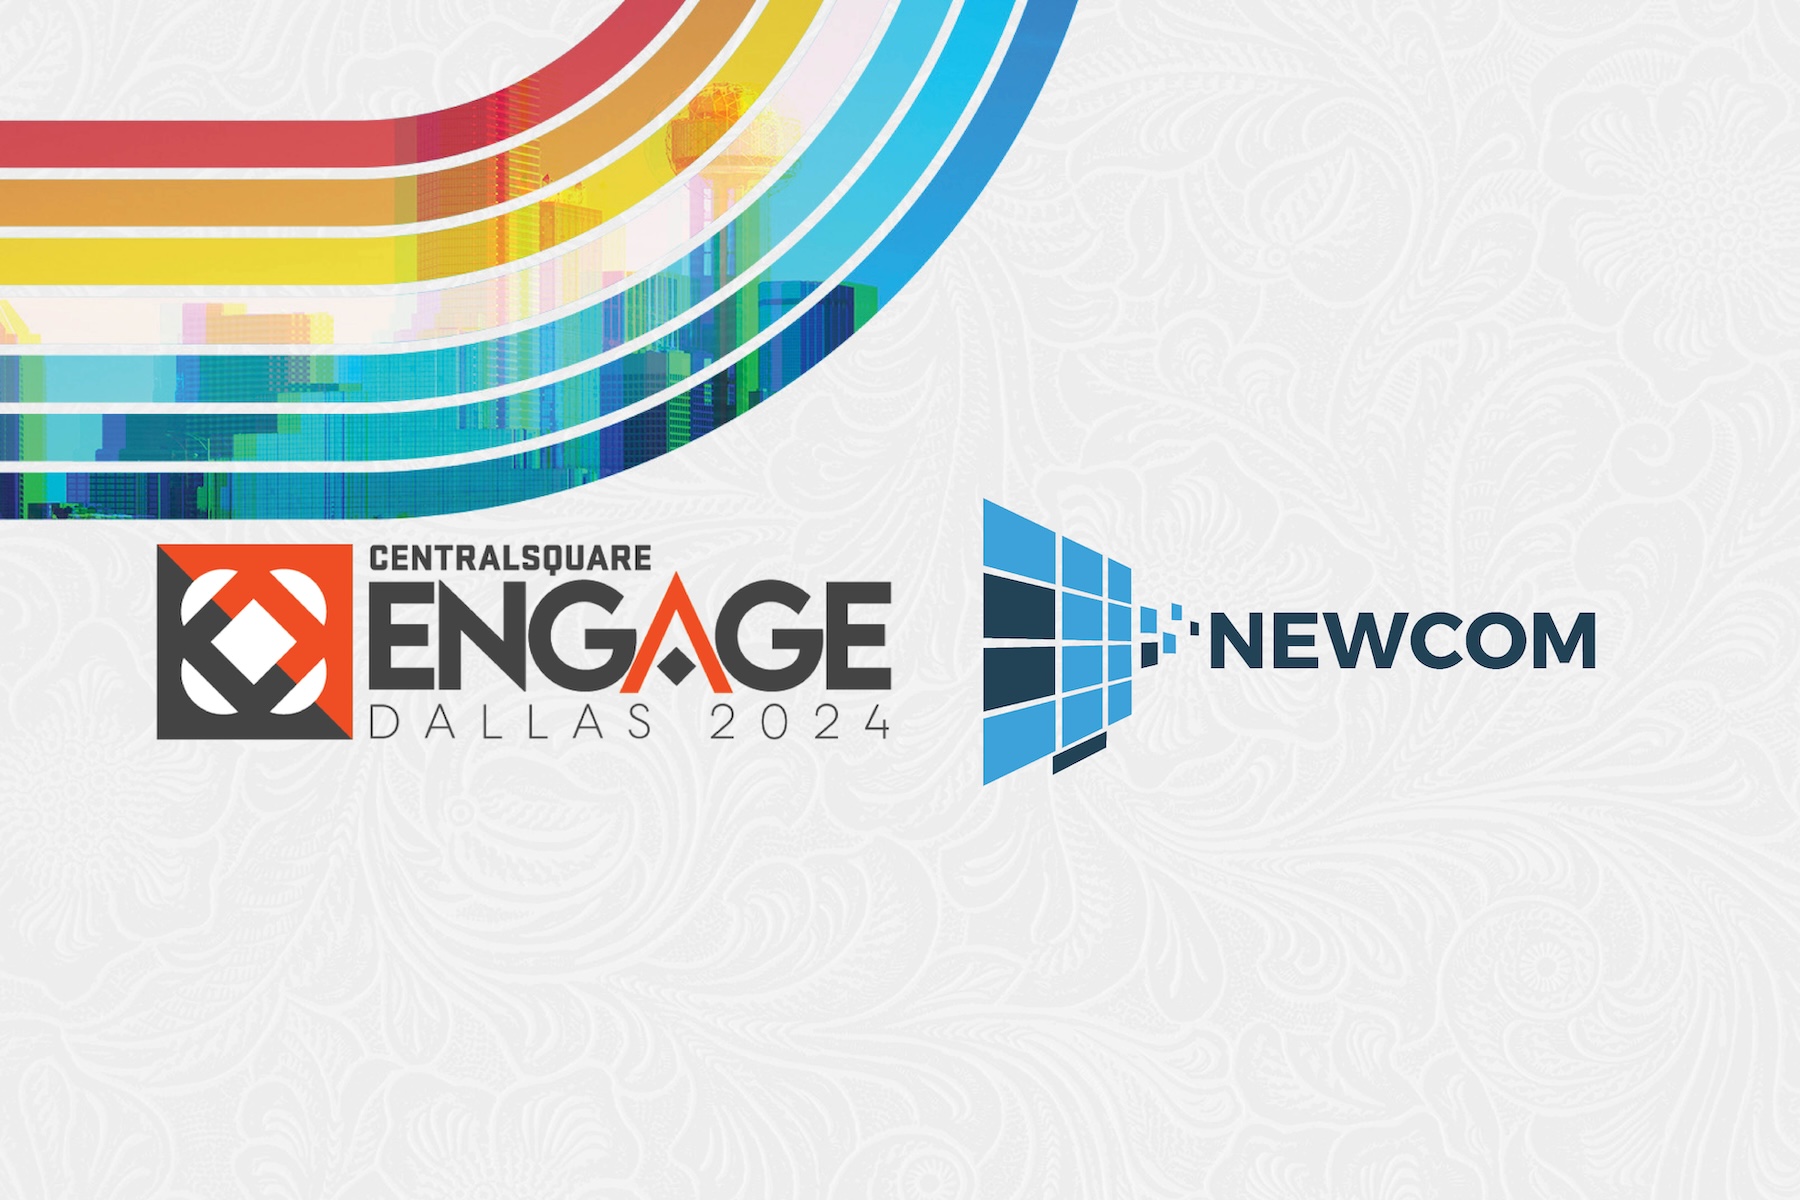 Join NEWCOM at CentralSquare ENGAGE 2024